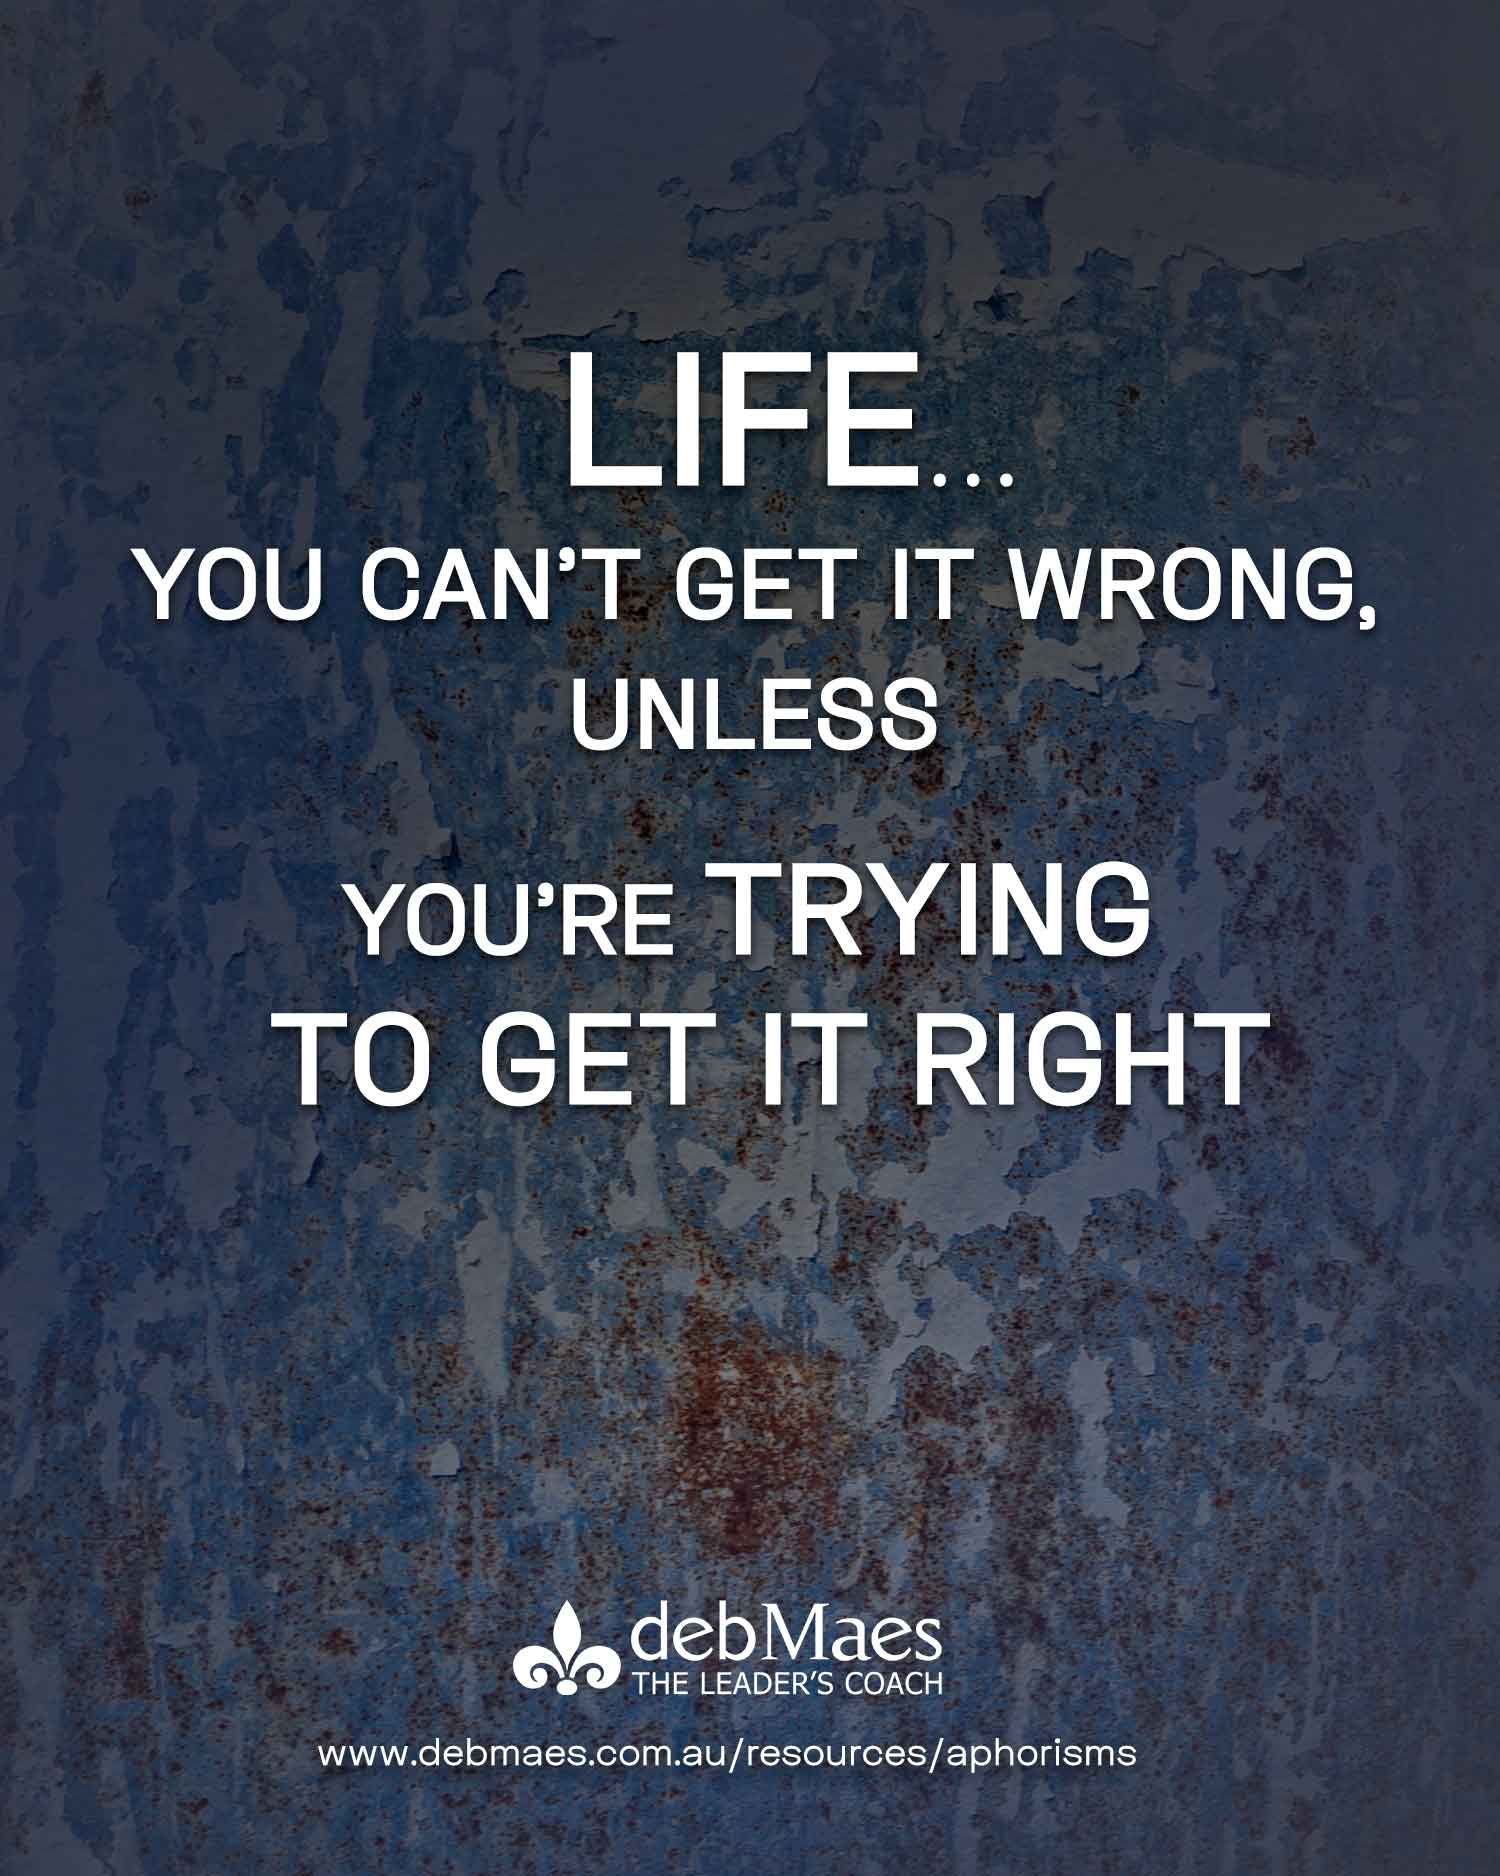 You can't get life wrong.